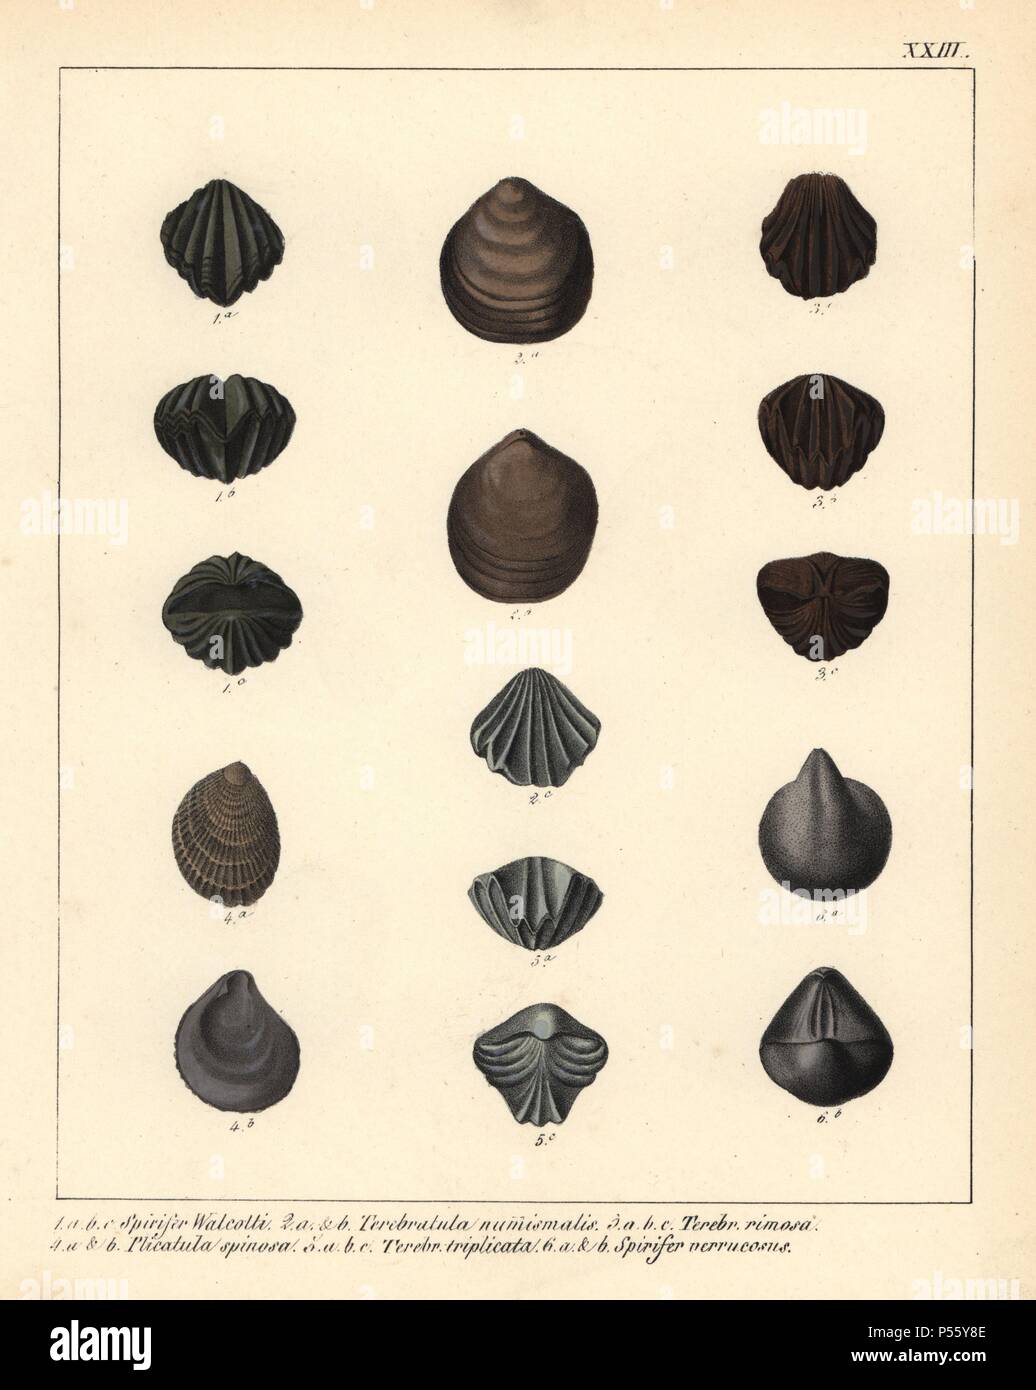 Extinct fossil brachipods: Spirifer walcotti, Terebratula numismalis, T. rimosa, Plicatula spinosa, T. triplicata, and Spirifer verrucosus. Handcoloured lithograph by an unknown artist from Dr. F.A. Schmidt's 'Petrefactenbuch,' published in Stuttgart, Germany, 1855 by Verlag von Krais & Hoffmann. Dr. Schmidt's 'Book of Petrification' introduced fossils and palaeontology to both the specialist and general reader. Stock Photo